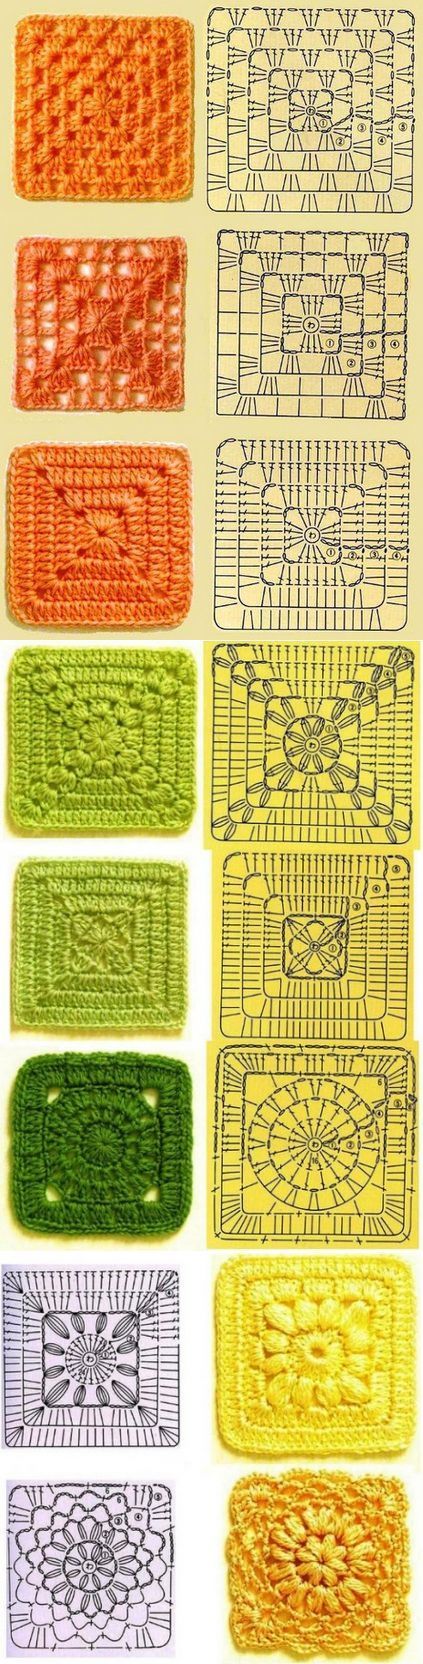 How To Crochet a Granny Square Patterns Tutorials For Beginners - DIY Easy Crochet Patterns Crochet Learning, Corak Menjahit, Granny Square Crochet Patterns Free, Crochet Bedspread Pattern, Crochet Stitches Guide, Mode Crochet, Crochet Design Pattern, Crochet Bedspread, Pola Sulam